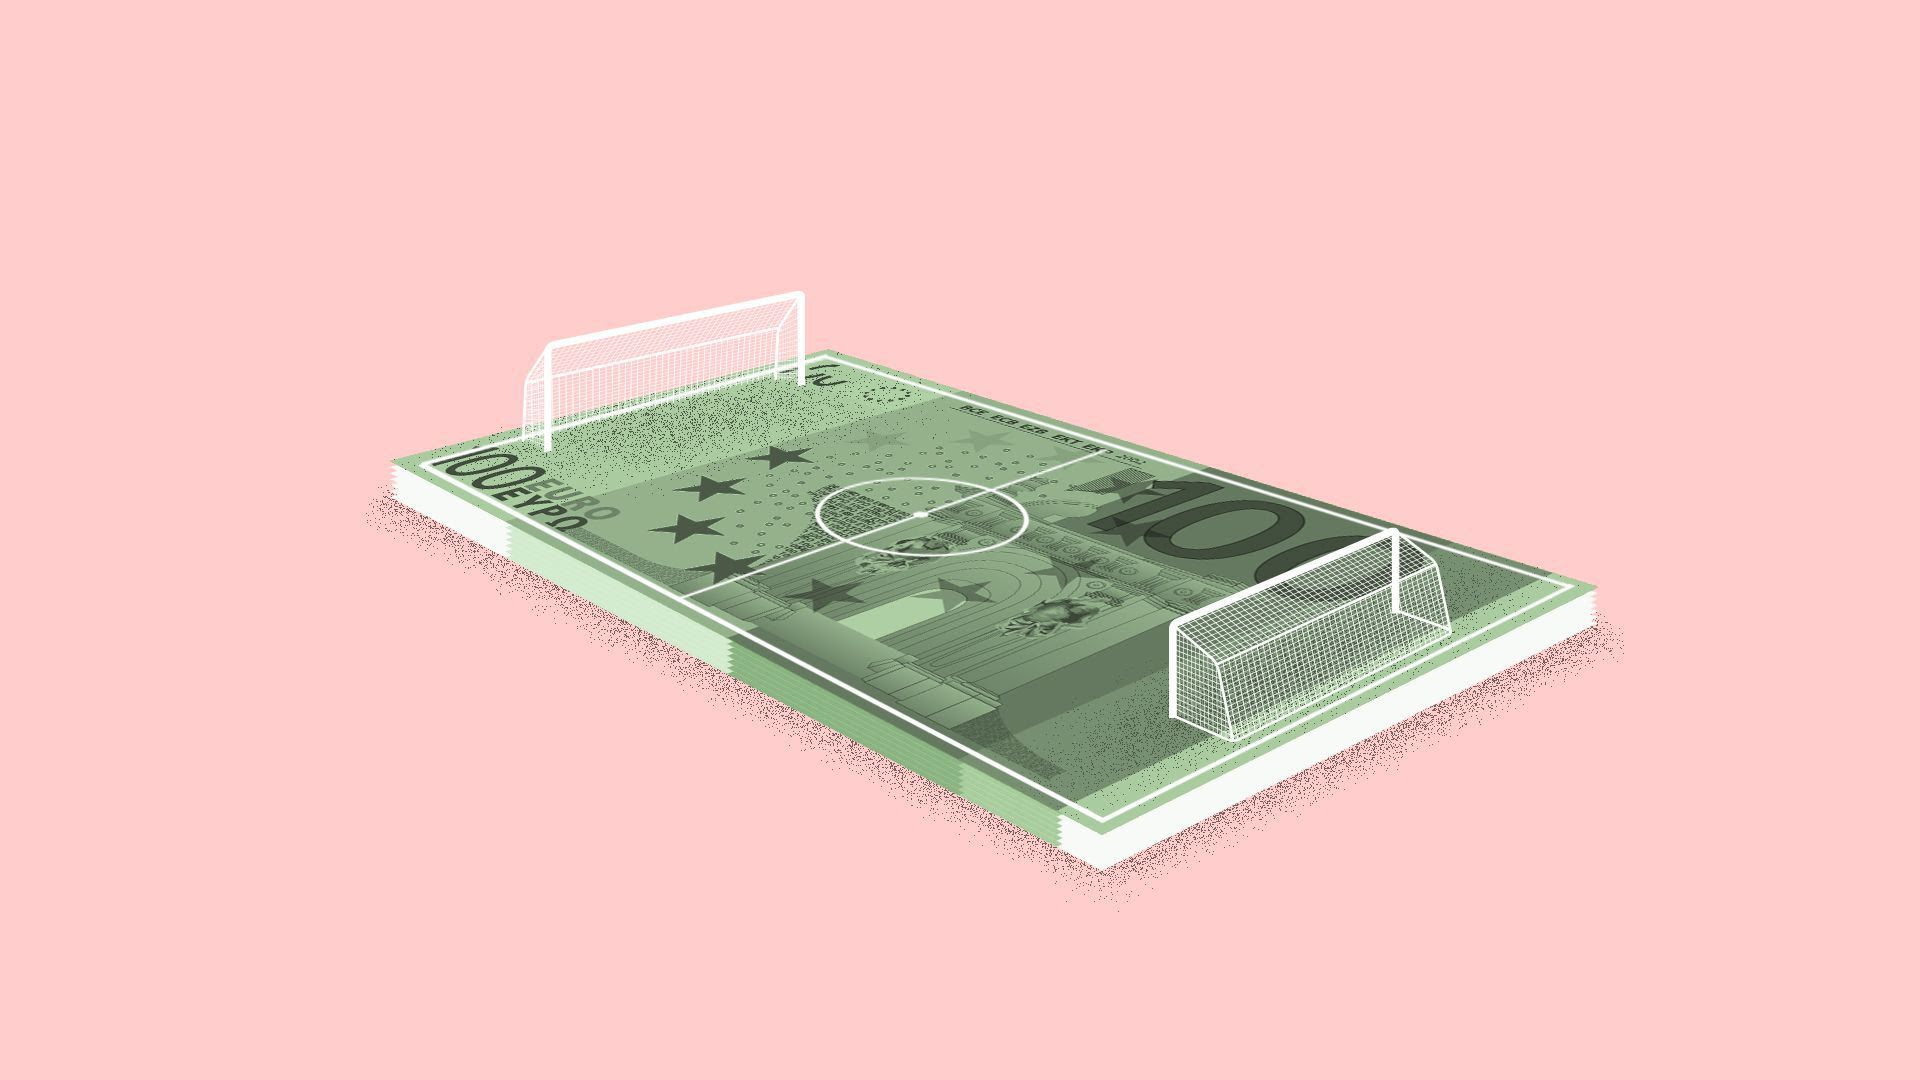 An illustration of a soccer field that looks like a dollar